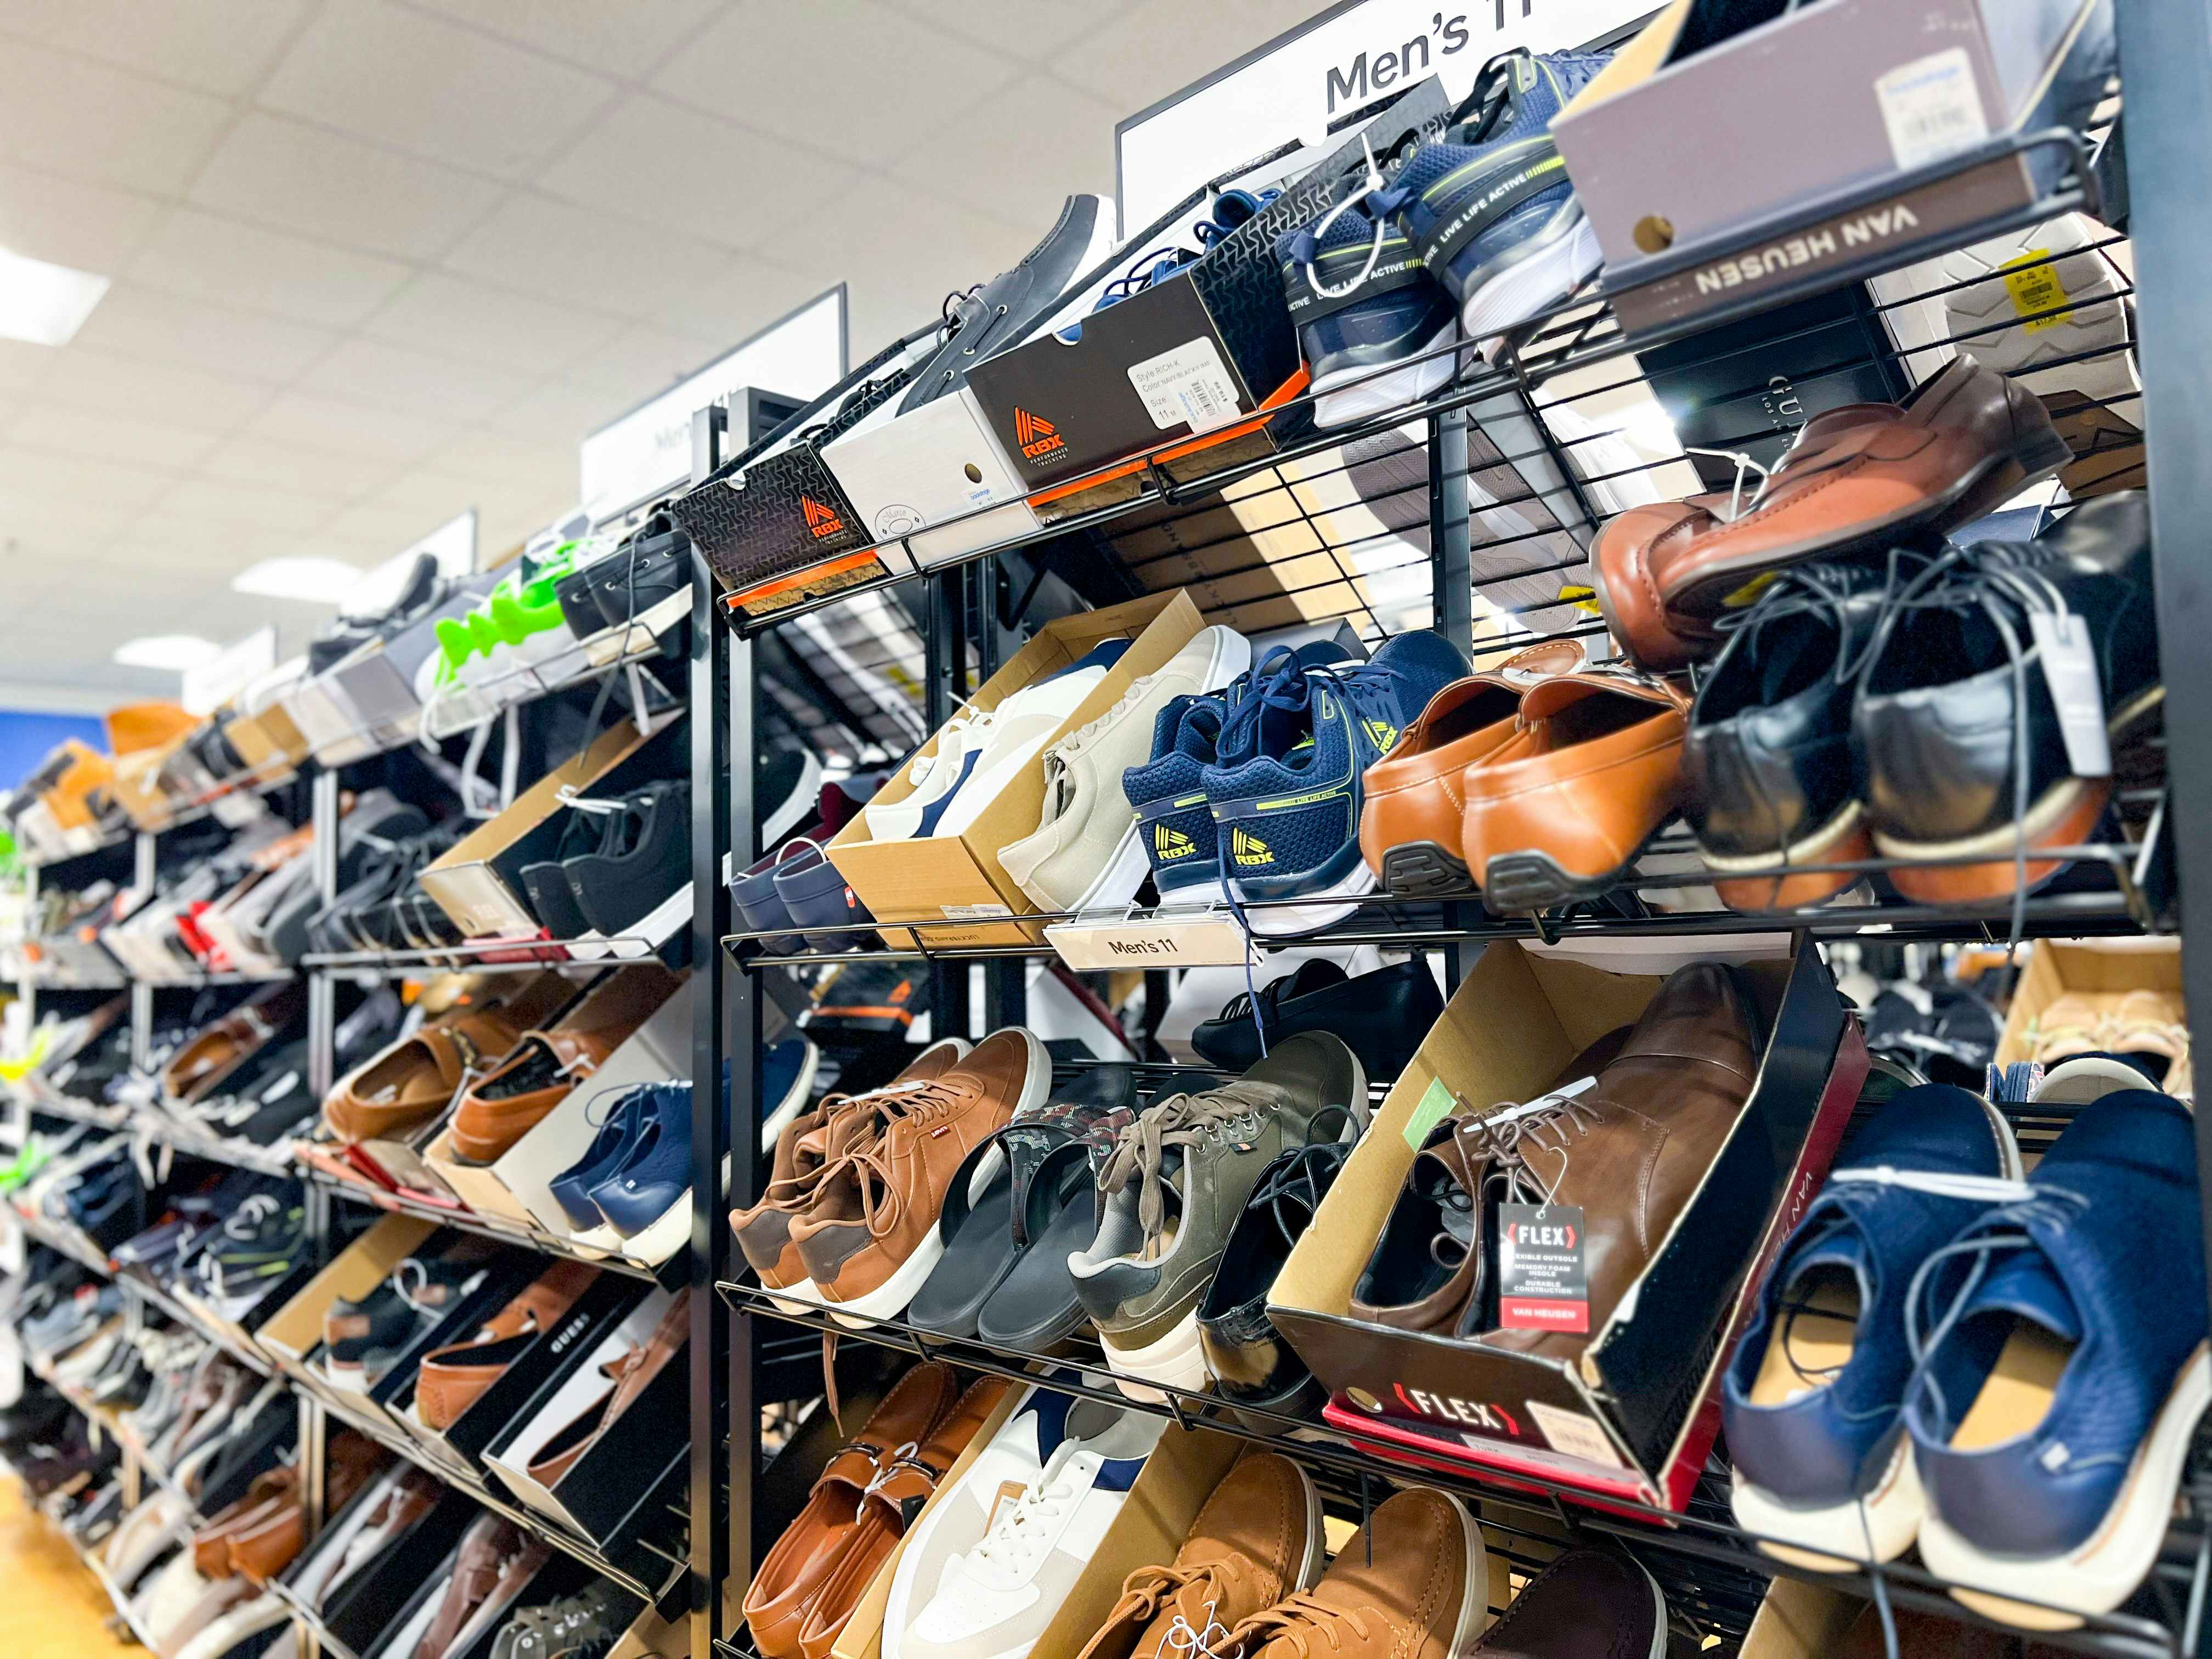 Shoe Deals at Macy's: $10 Women's Slippers, $24 Men's Dress Shoes, and More